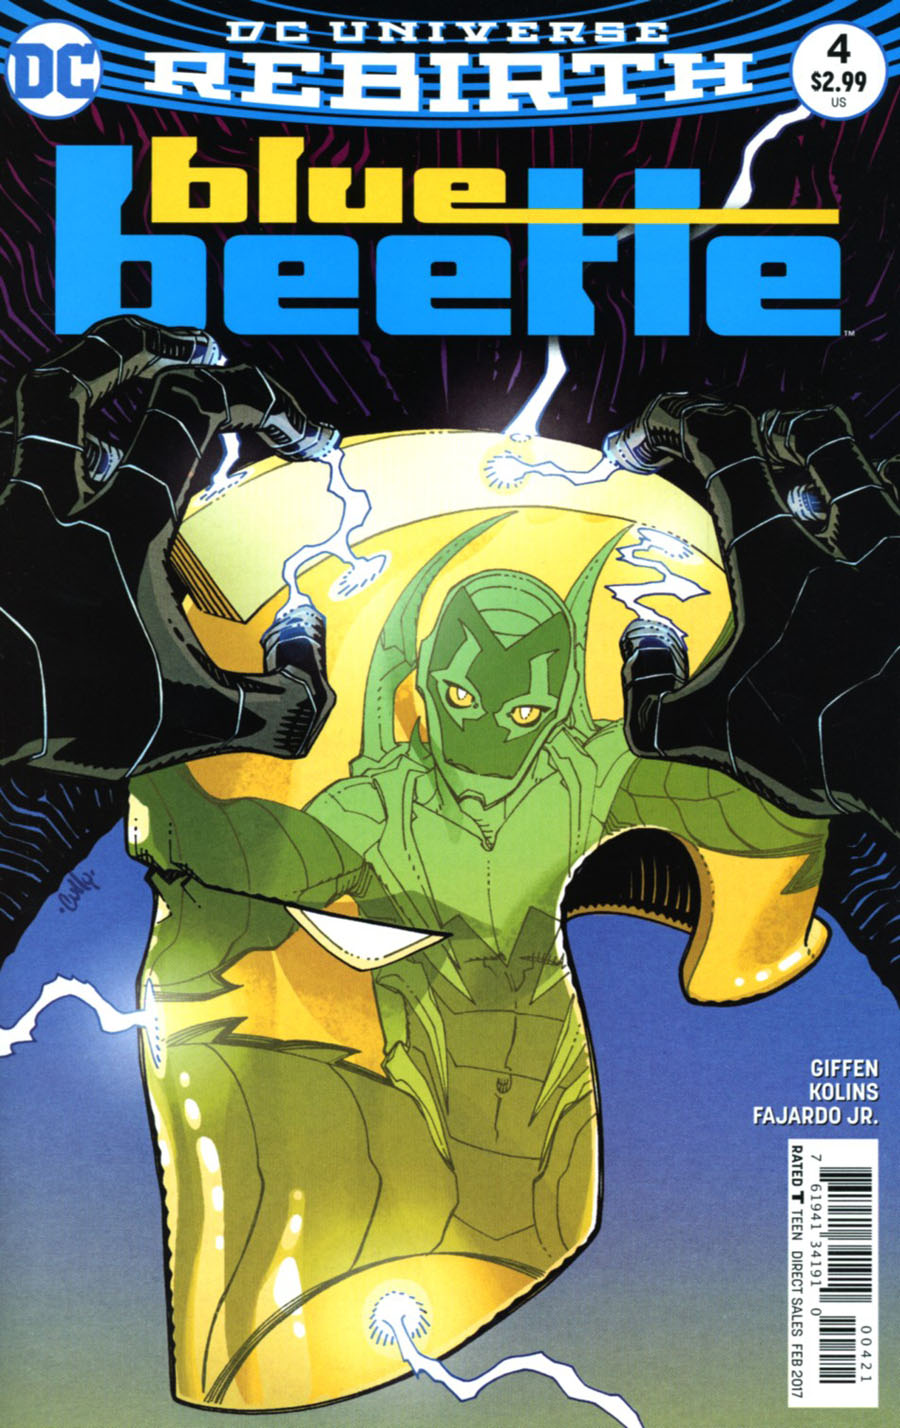 Blue Beetle (DC) Vol 4 #4 Cover B Variant Cully Hamner Cover